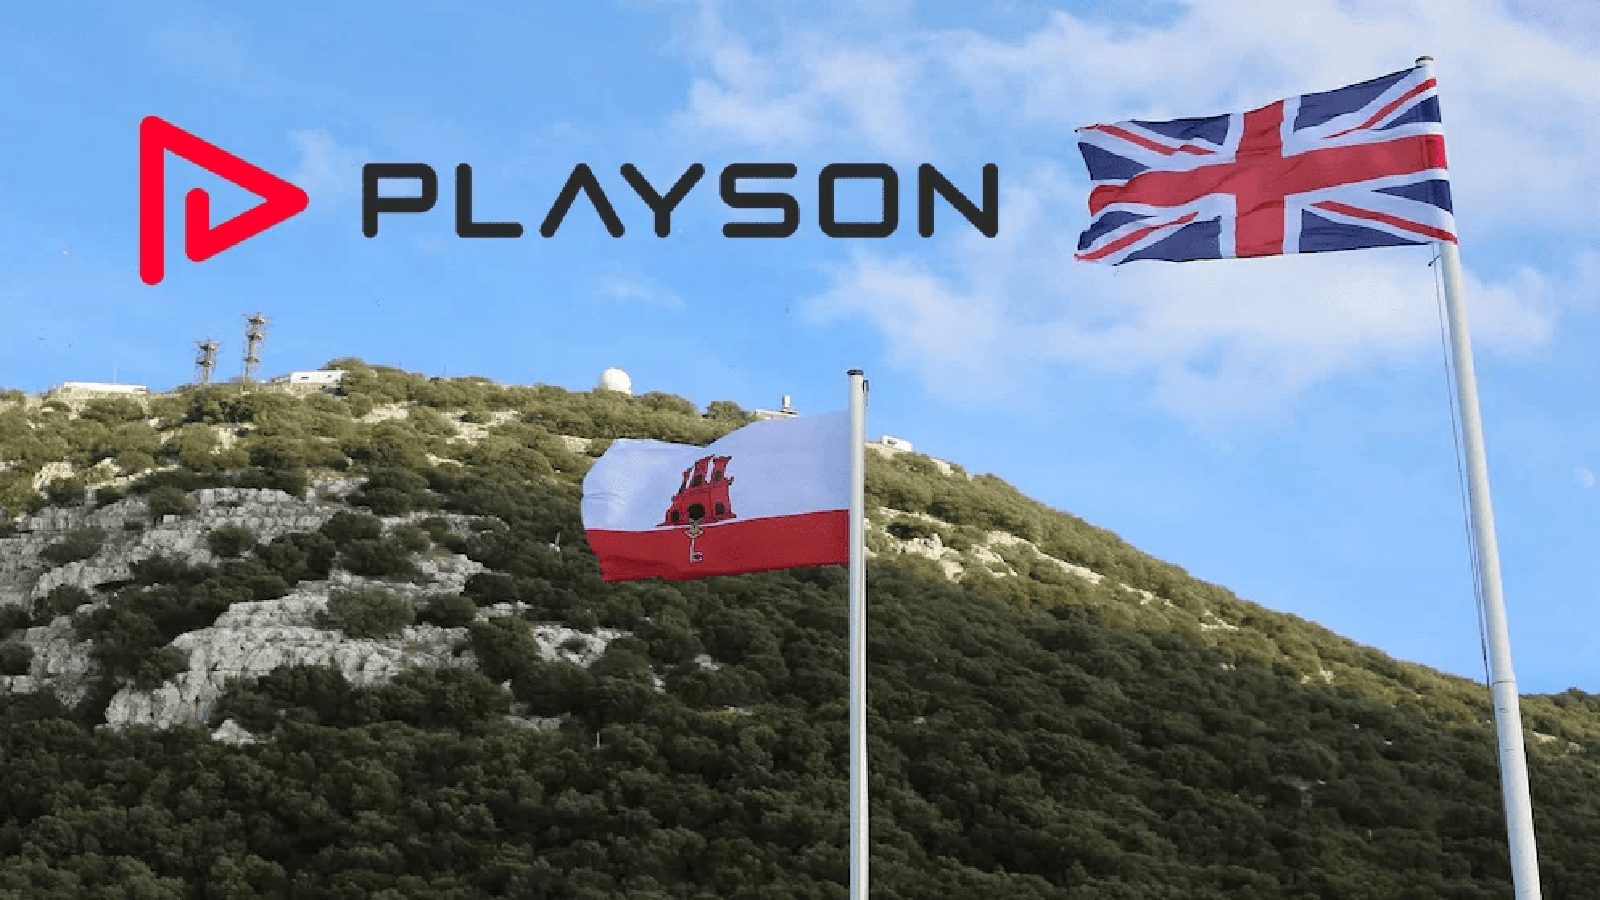 Playson Secures B2B License from Gibraltar